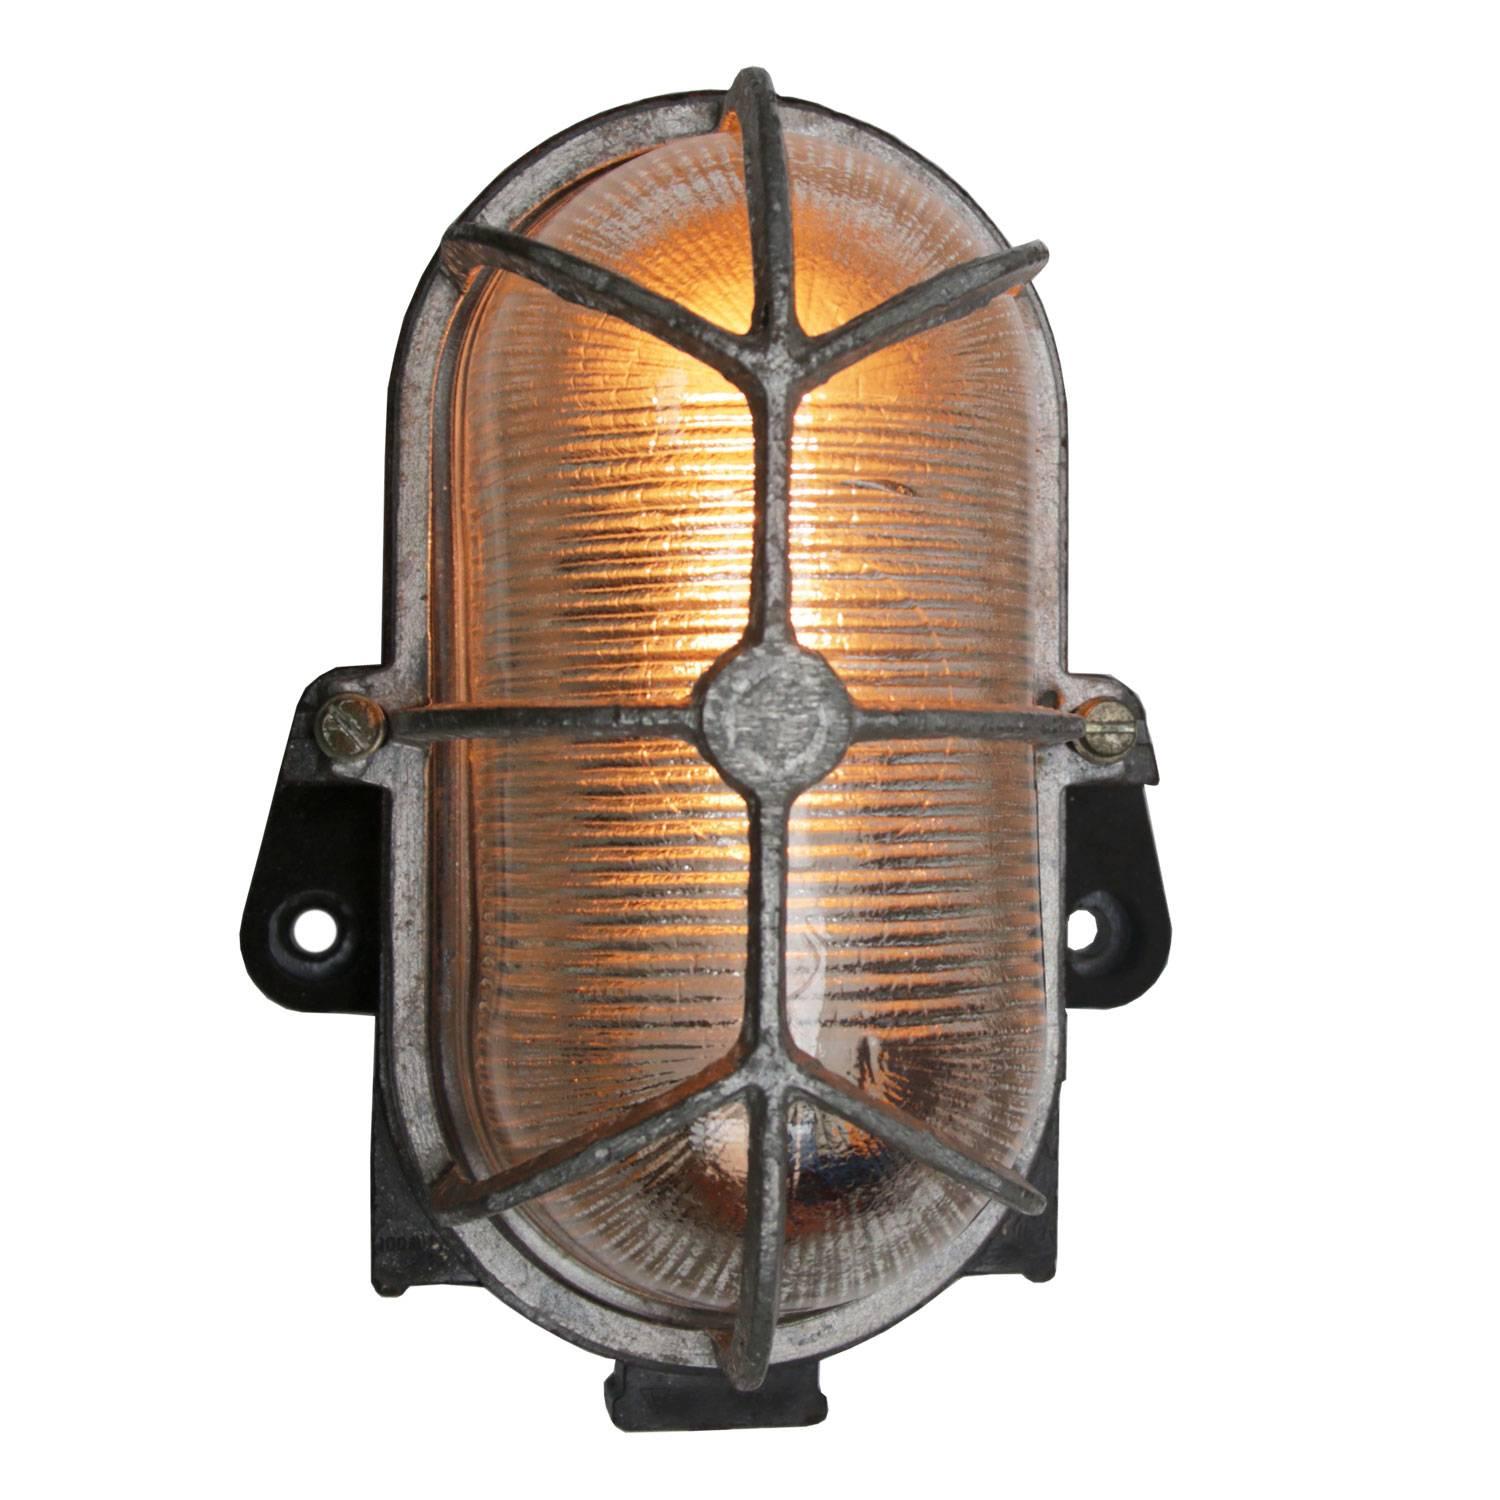 Industrial wall and ceiling scone. Bakelite back. Holophane striped glass.
Aluminium frame.

Weight: 0.8 kg / 1.8 lb

Priced individual item. All lamps have been made suitable by international standards for incandescent light bulbs,